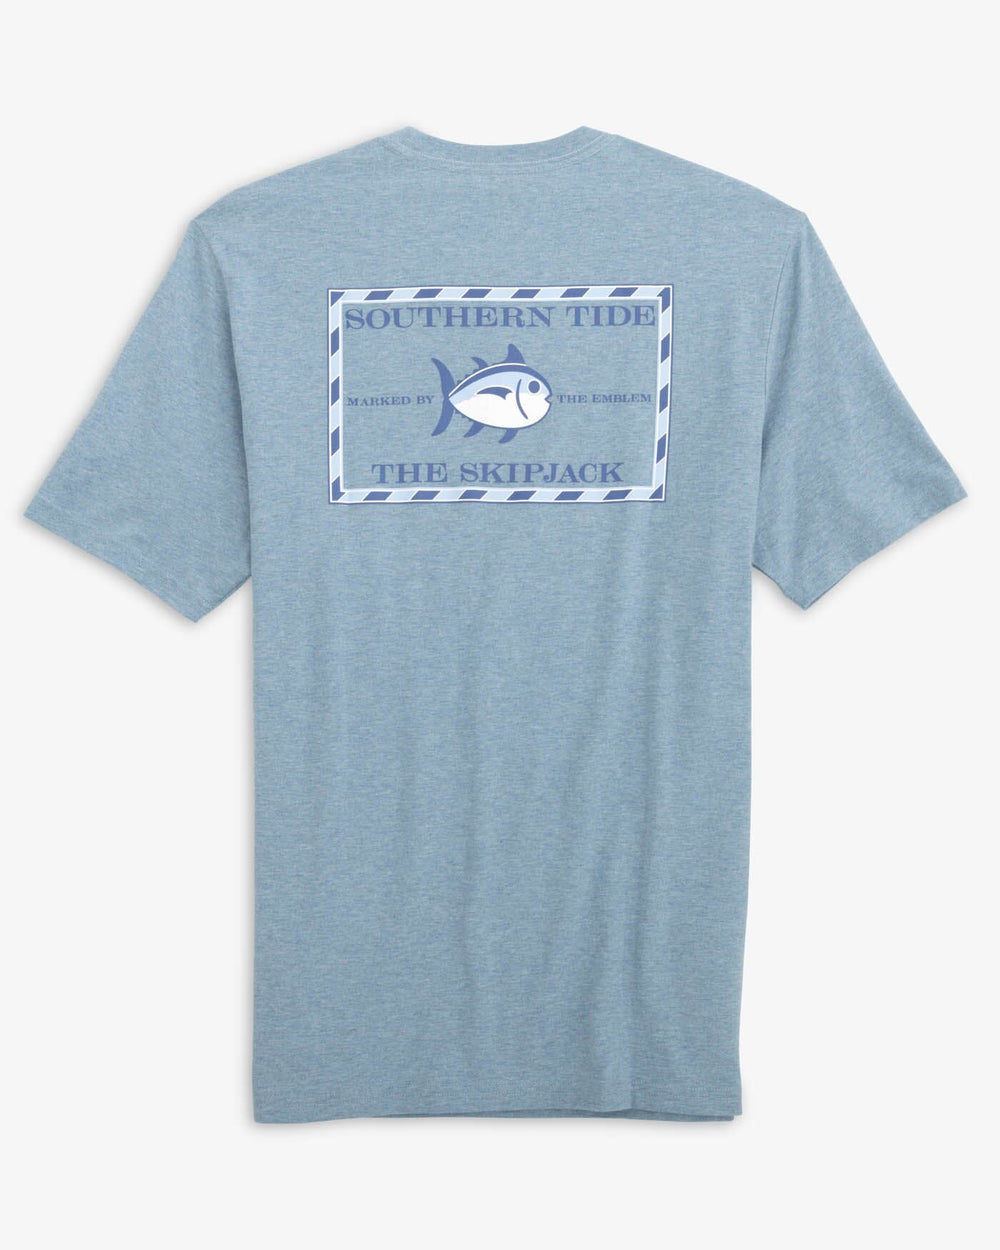 The back view of the Southern Tide Heathered Original Skipjack T-Shirt by Southern Tide - Heather Blue Shadow